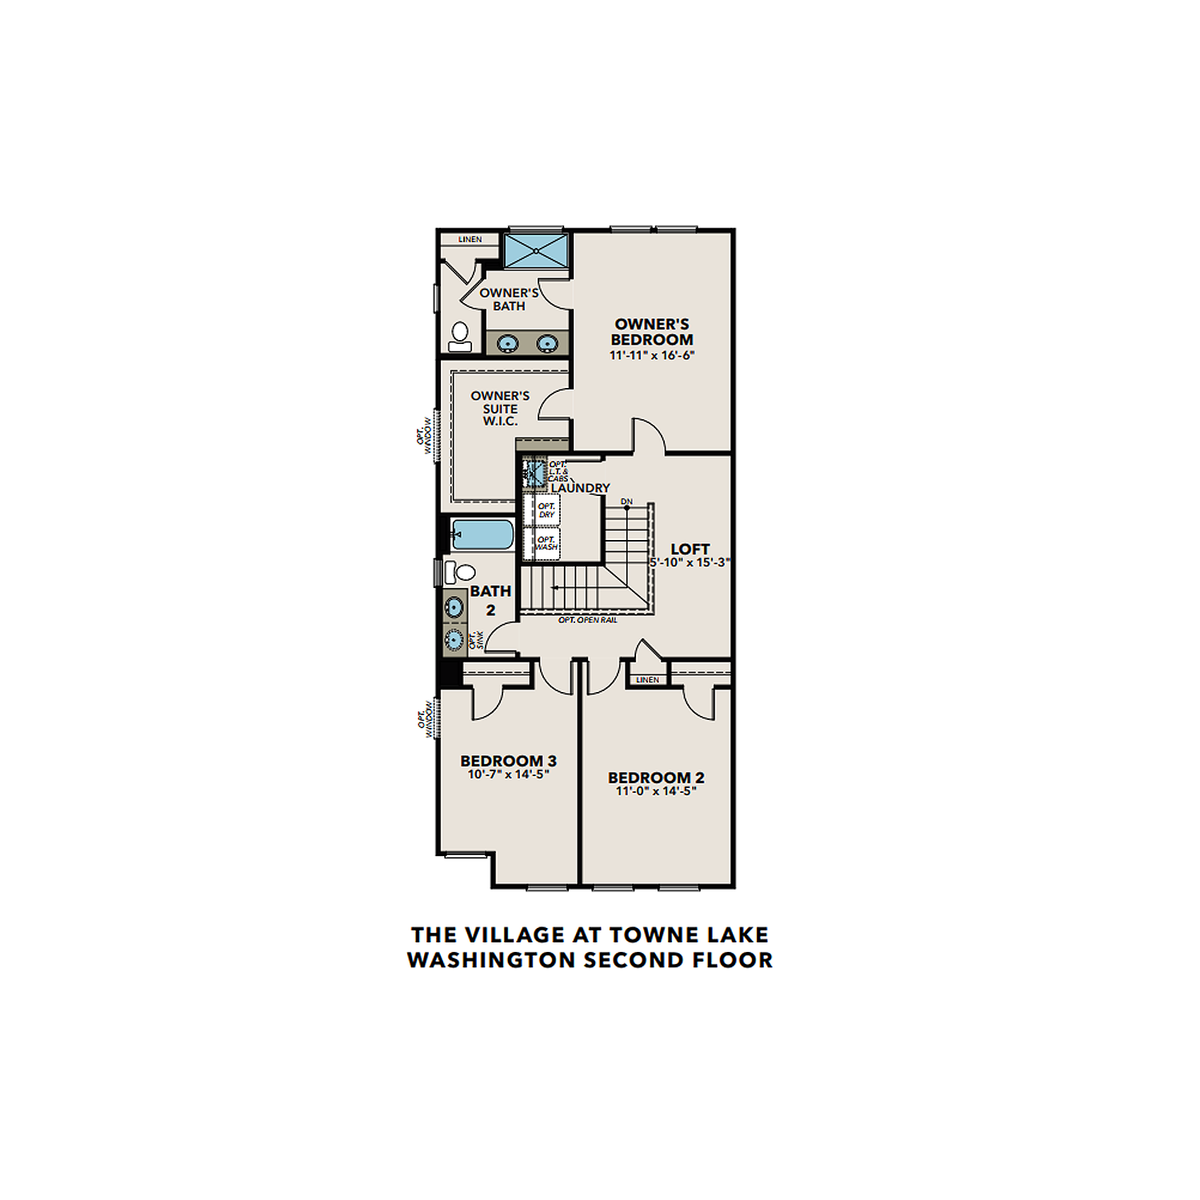 2 - The Washington D buildable floor plan layout in Davidson Homes' The Village at Towne Lake community.